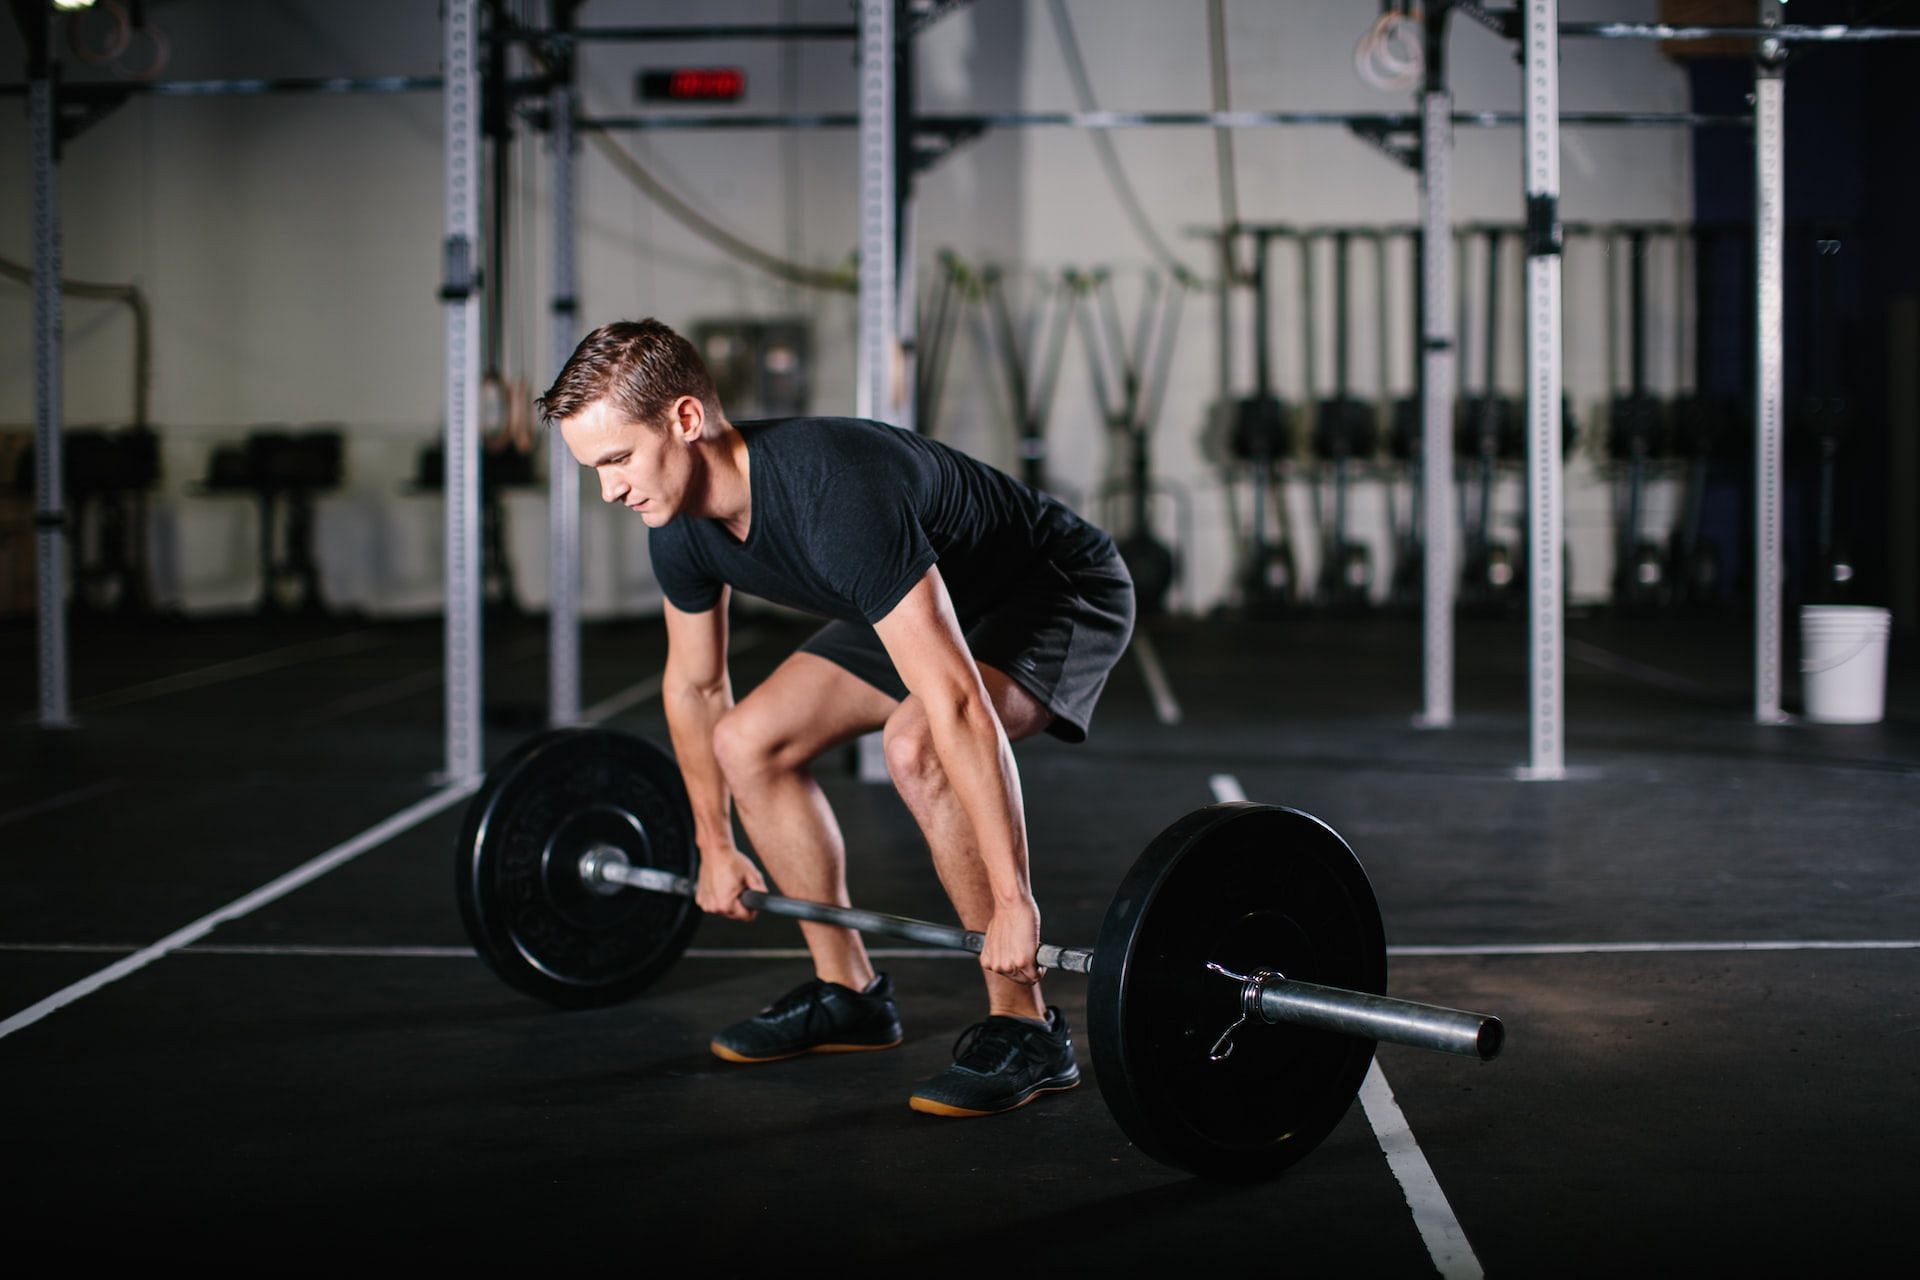 Use an overhand grip for the bent-over row move. (Photo via Unsplash/Mariah Krafft)